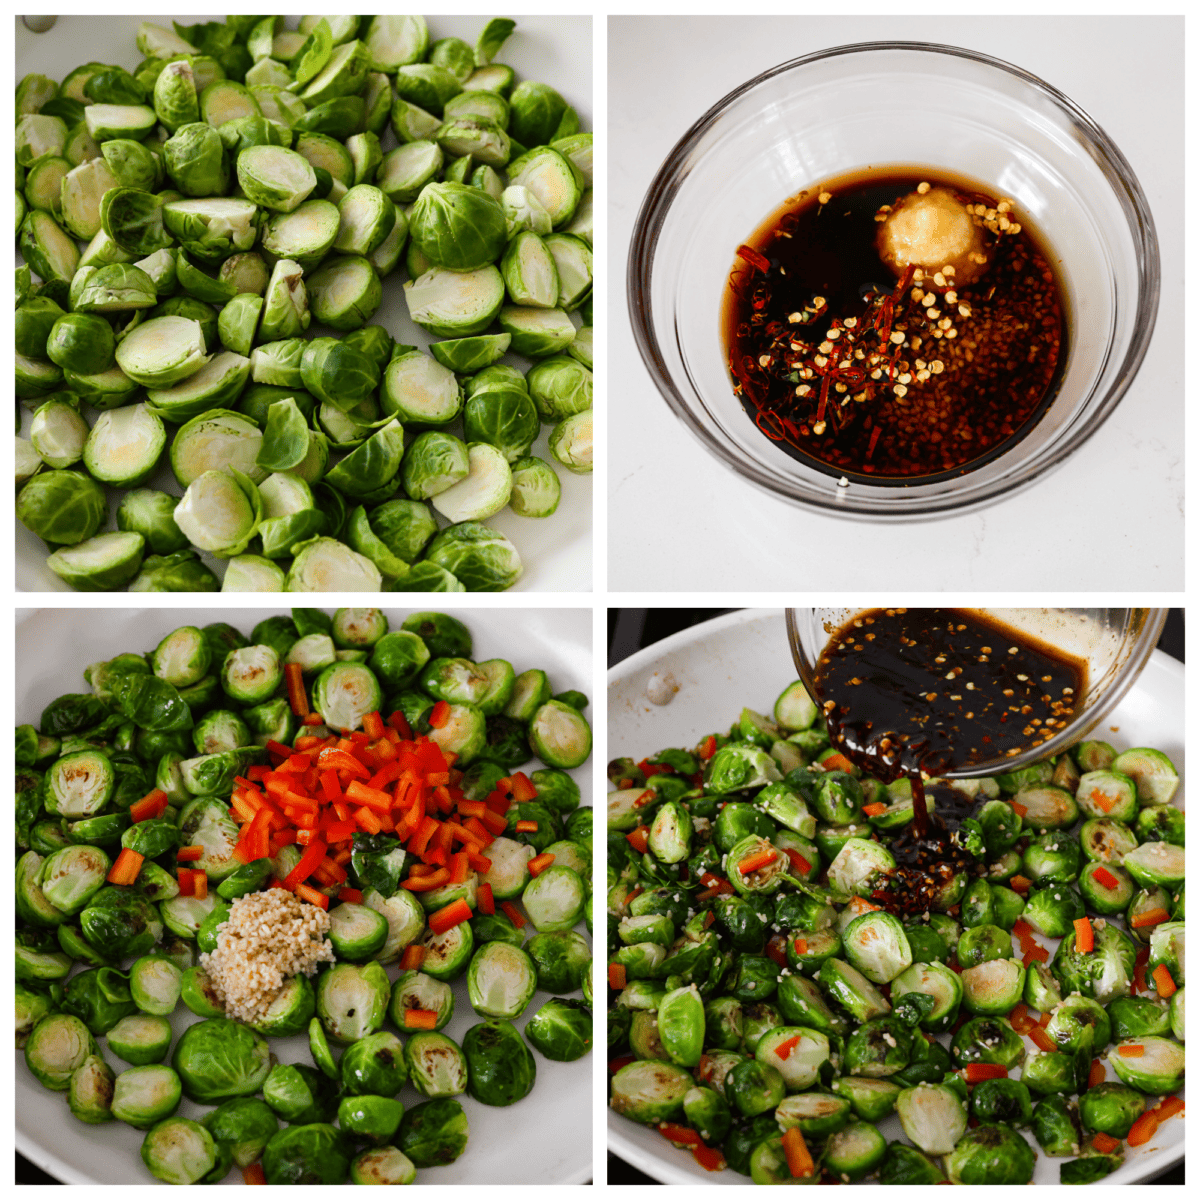 4-photo collage of the Brussels sprouts being sautéed and covered in the homemade sauce.